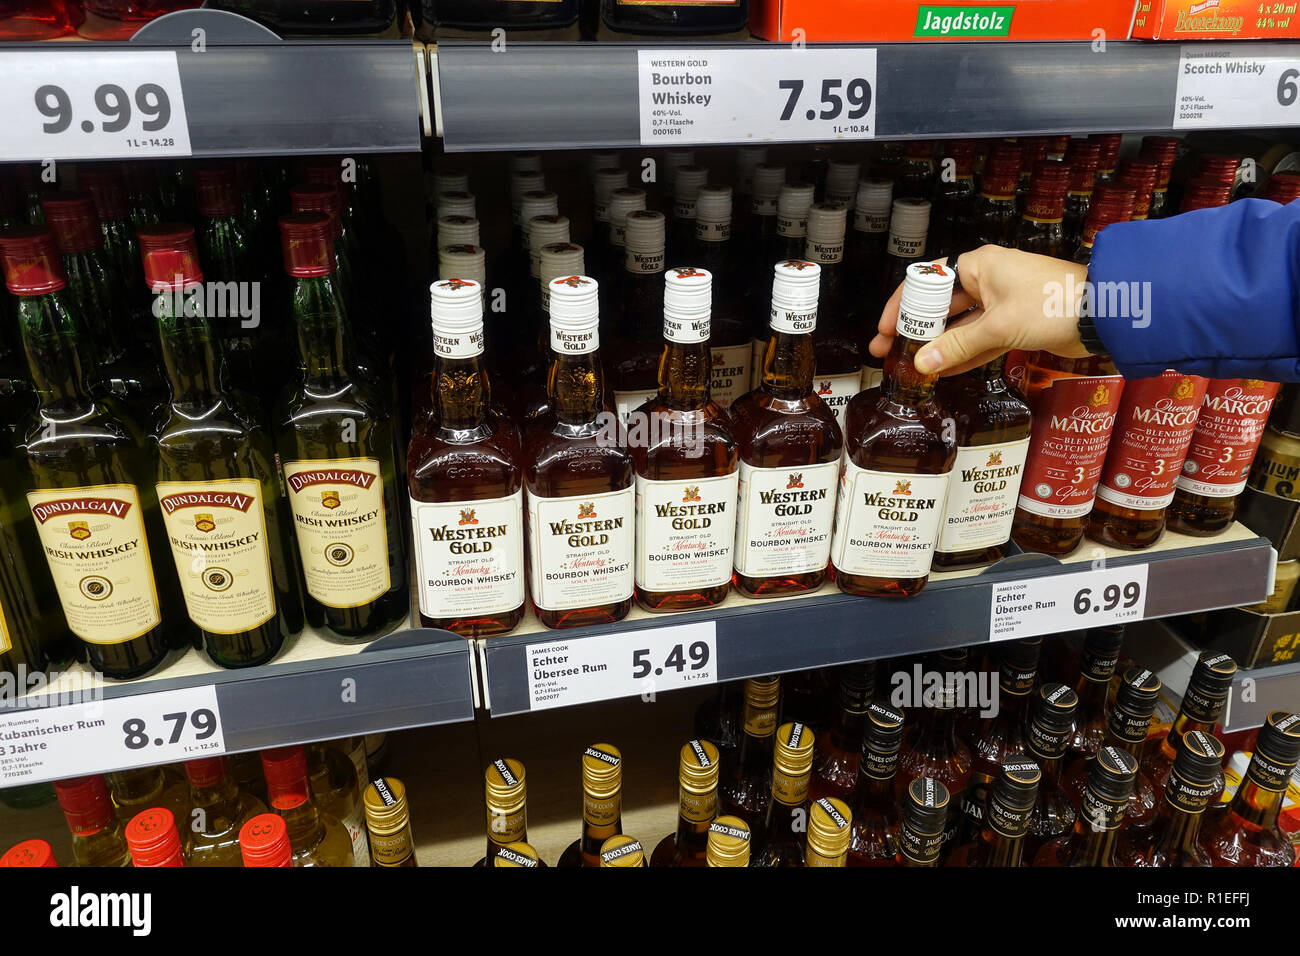 Private label brand liquors in a Lidl supermarket Stock Photo